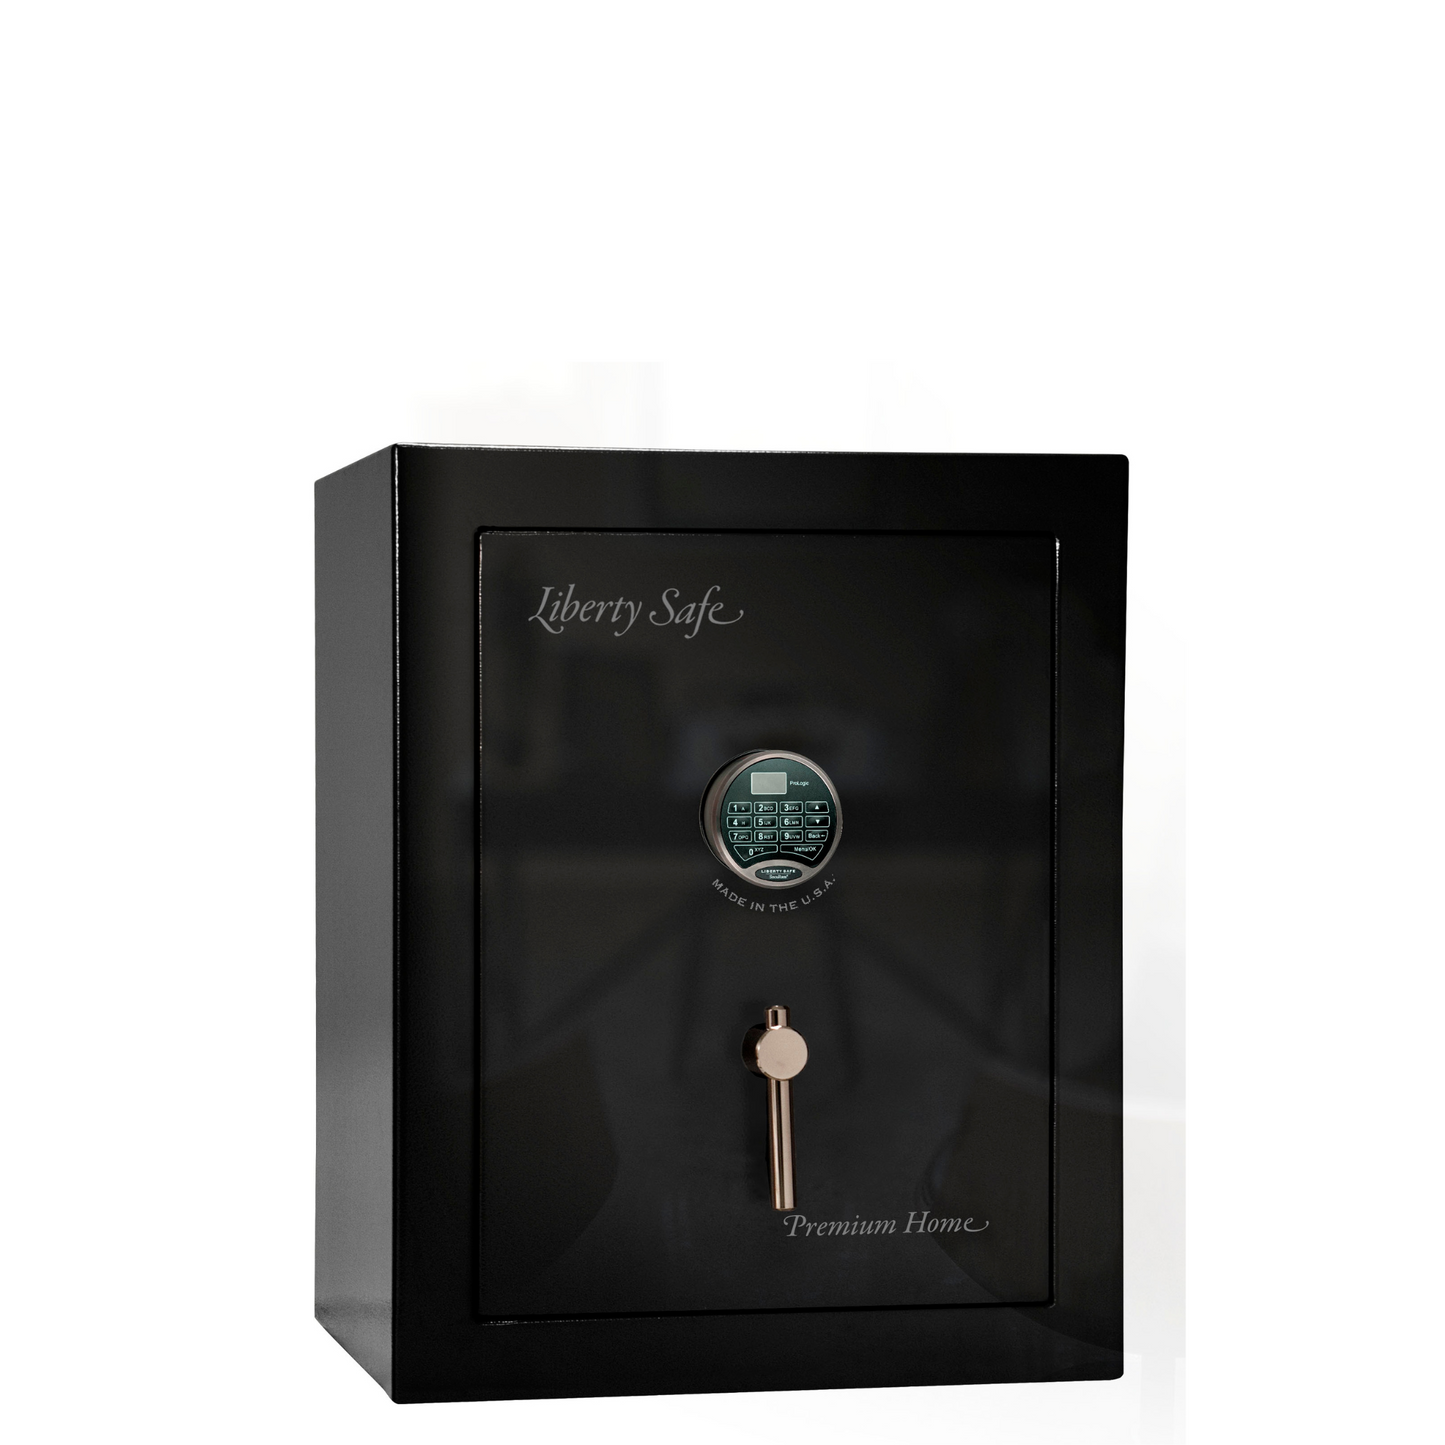 Premium Home Series | Level 7 Security | 2 Hour Fire Protection | 08 | Dimensions: 29.75"(H) x 24.5"(W) x 19"(D) | Black Gloss Black Chrome - Closed Door